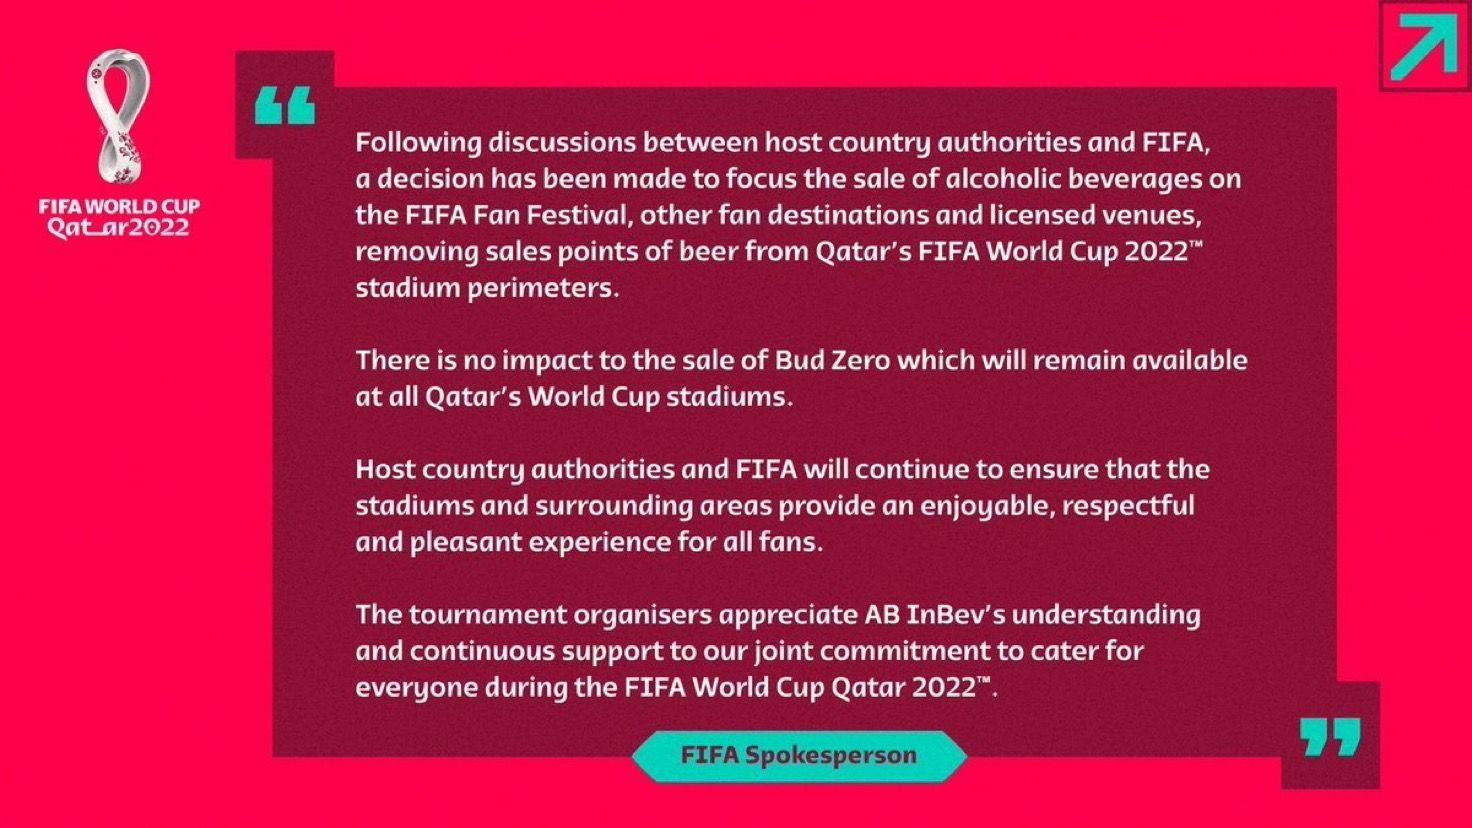 Faith first: Qatar bans alcoholic beverages around World Cup stadiums